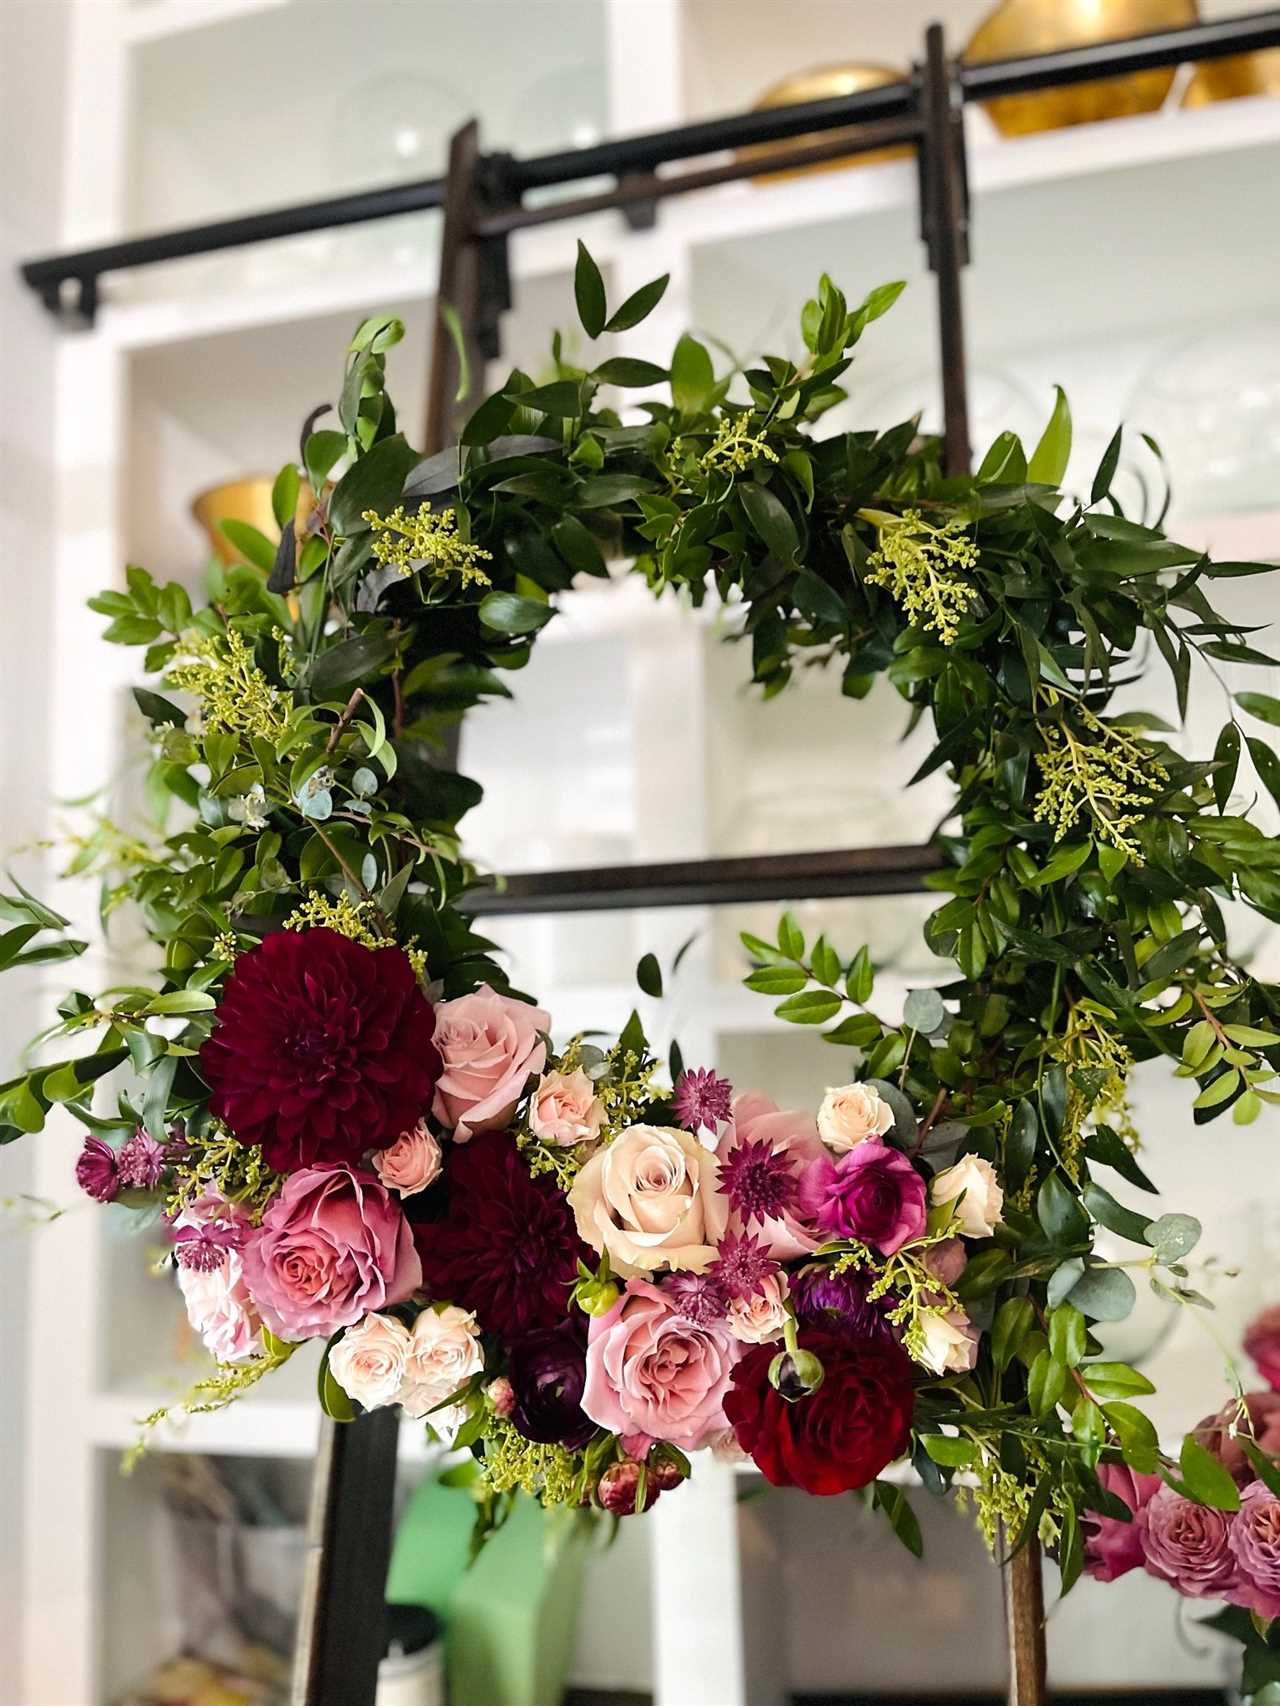 Why Choose Beautiful Wreaths for Front Door?